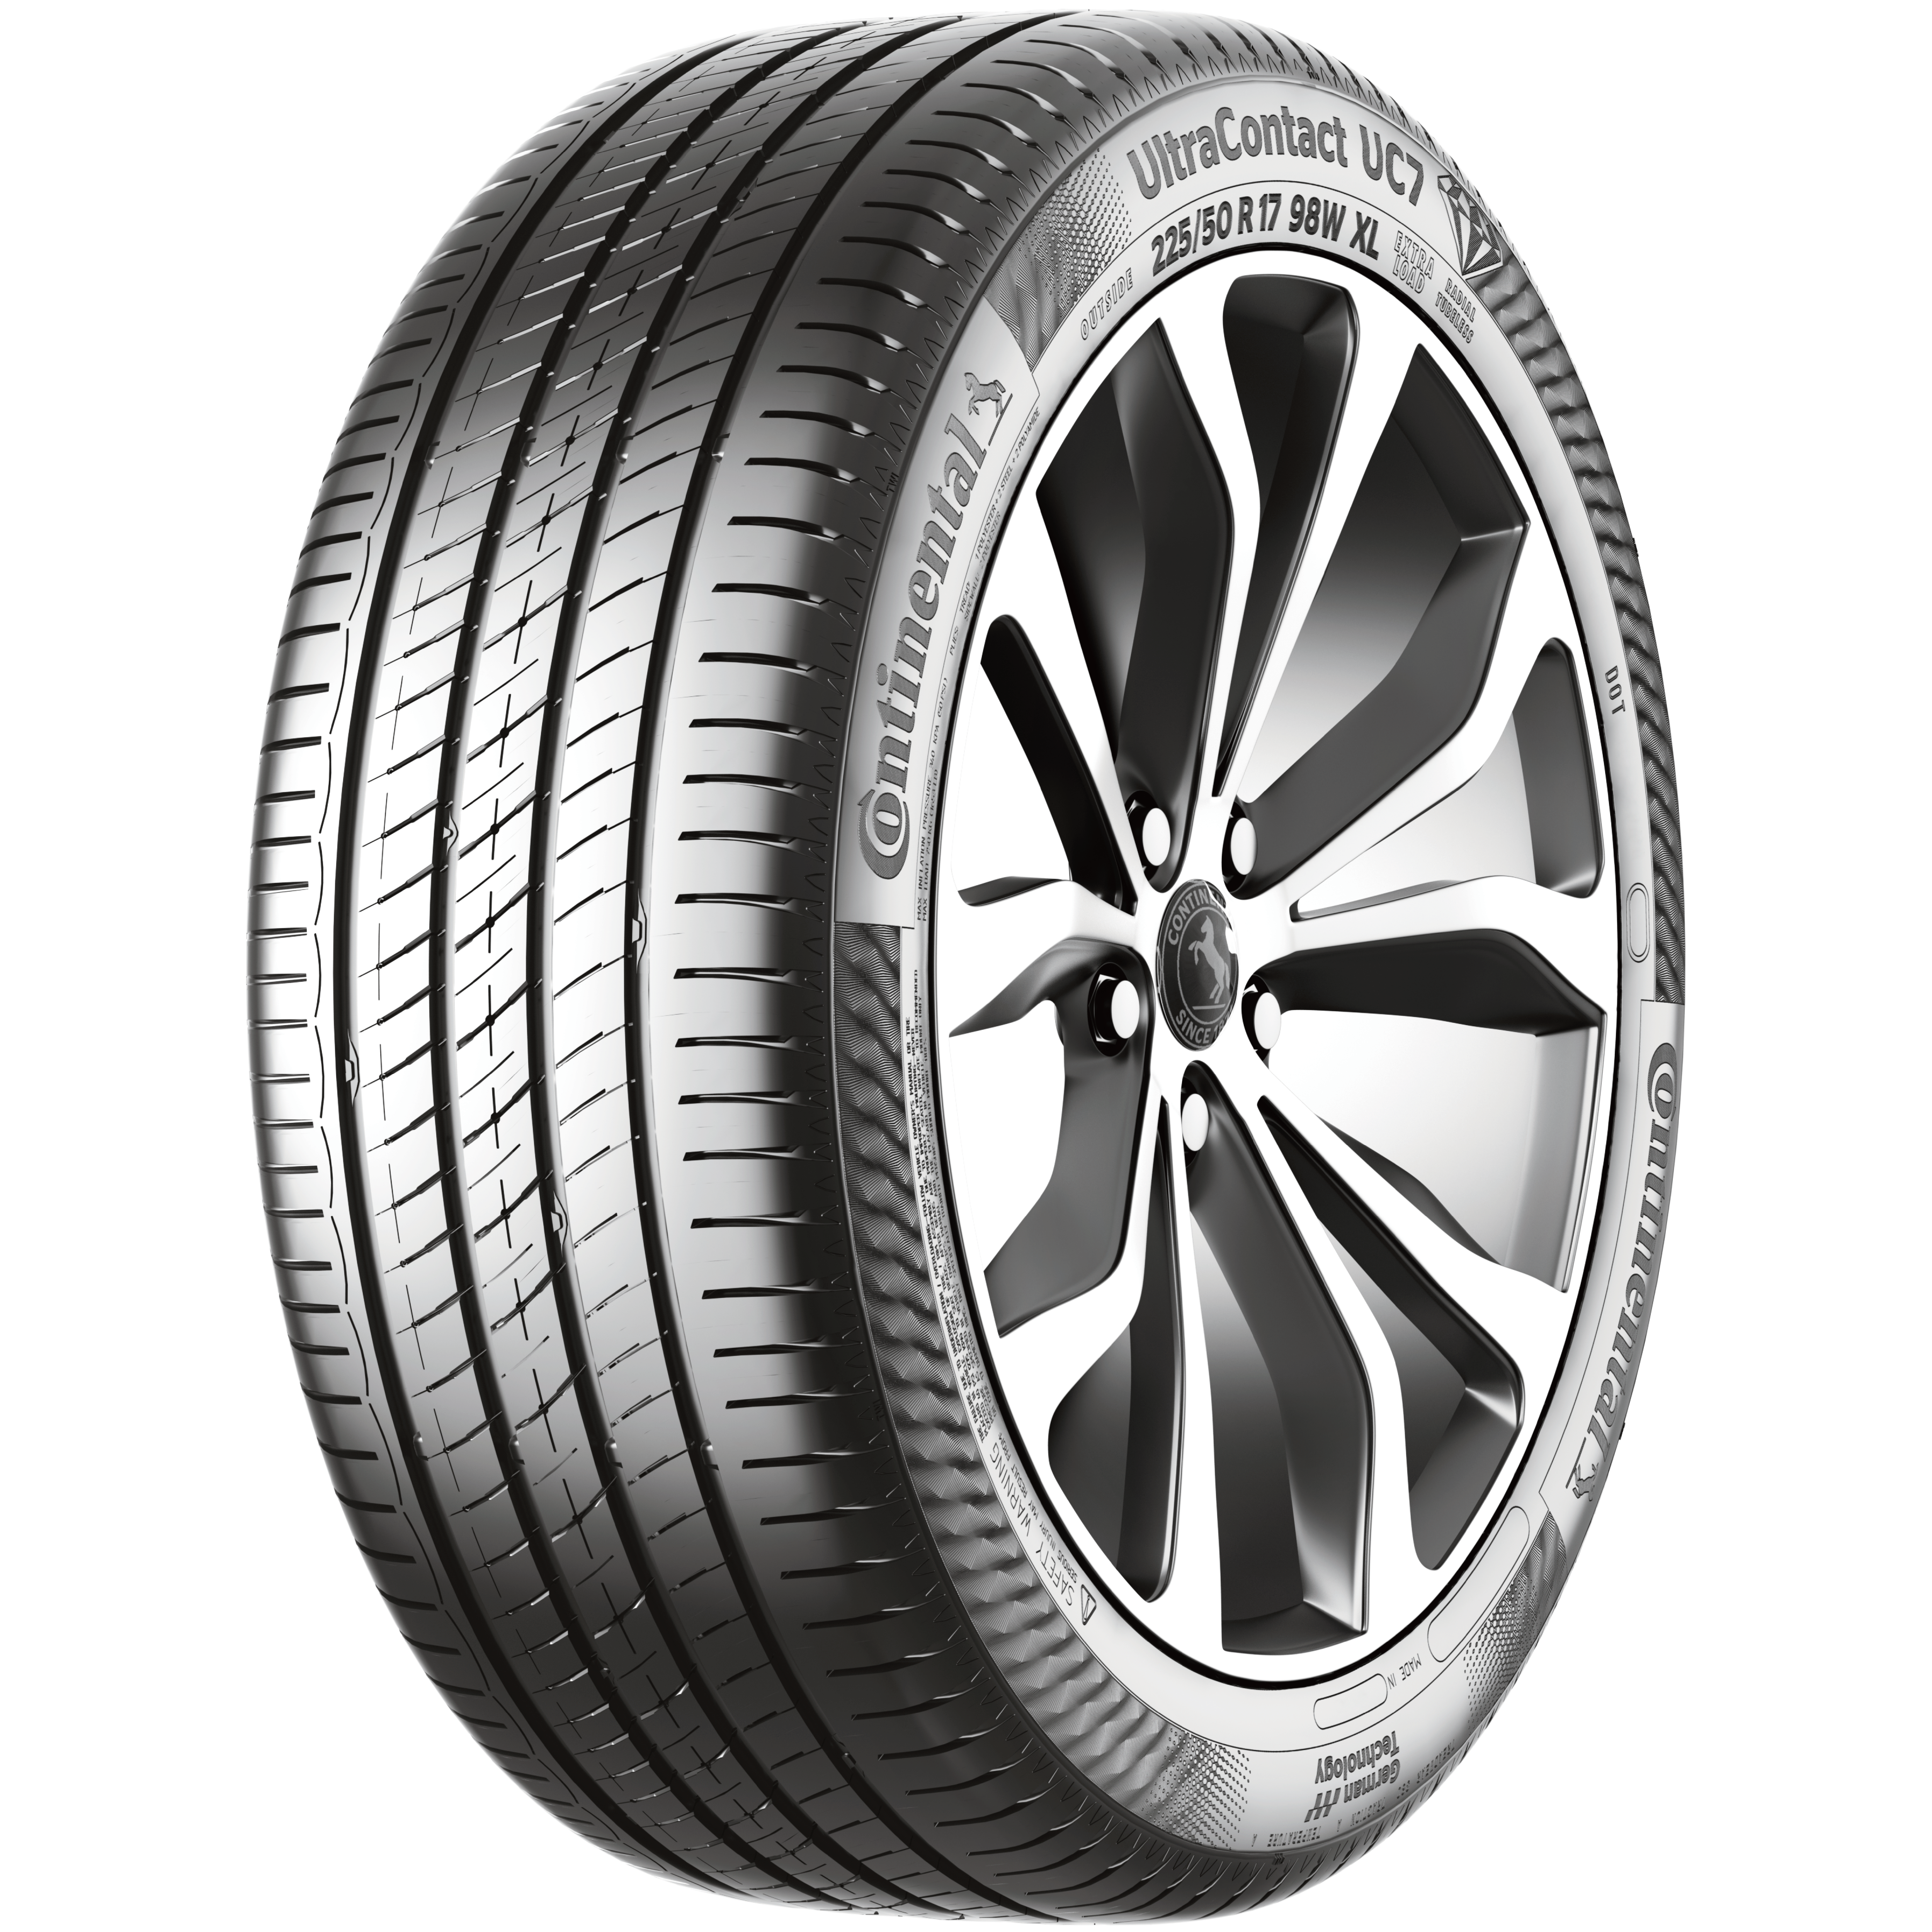 Continental ULTRACONTACT. Continental ULTRACONTACT Tyres. Т Continental Ultra contact 6. Continental ULTRACONTACT uc6 SUV. Continental ultracontact uc6